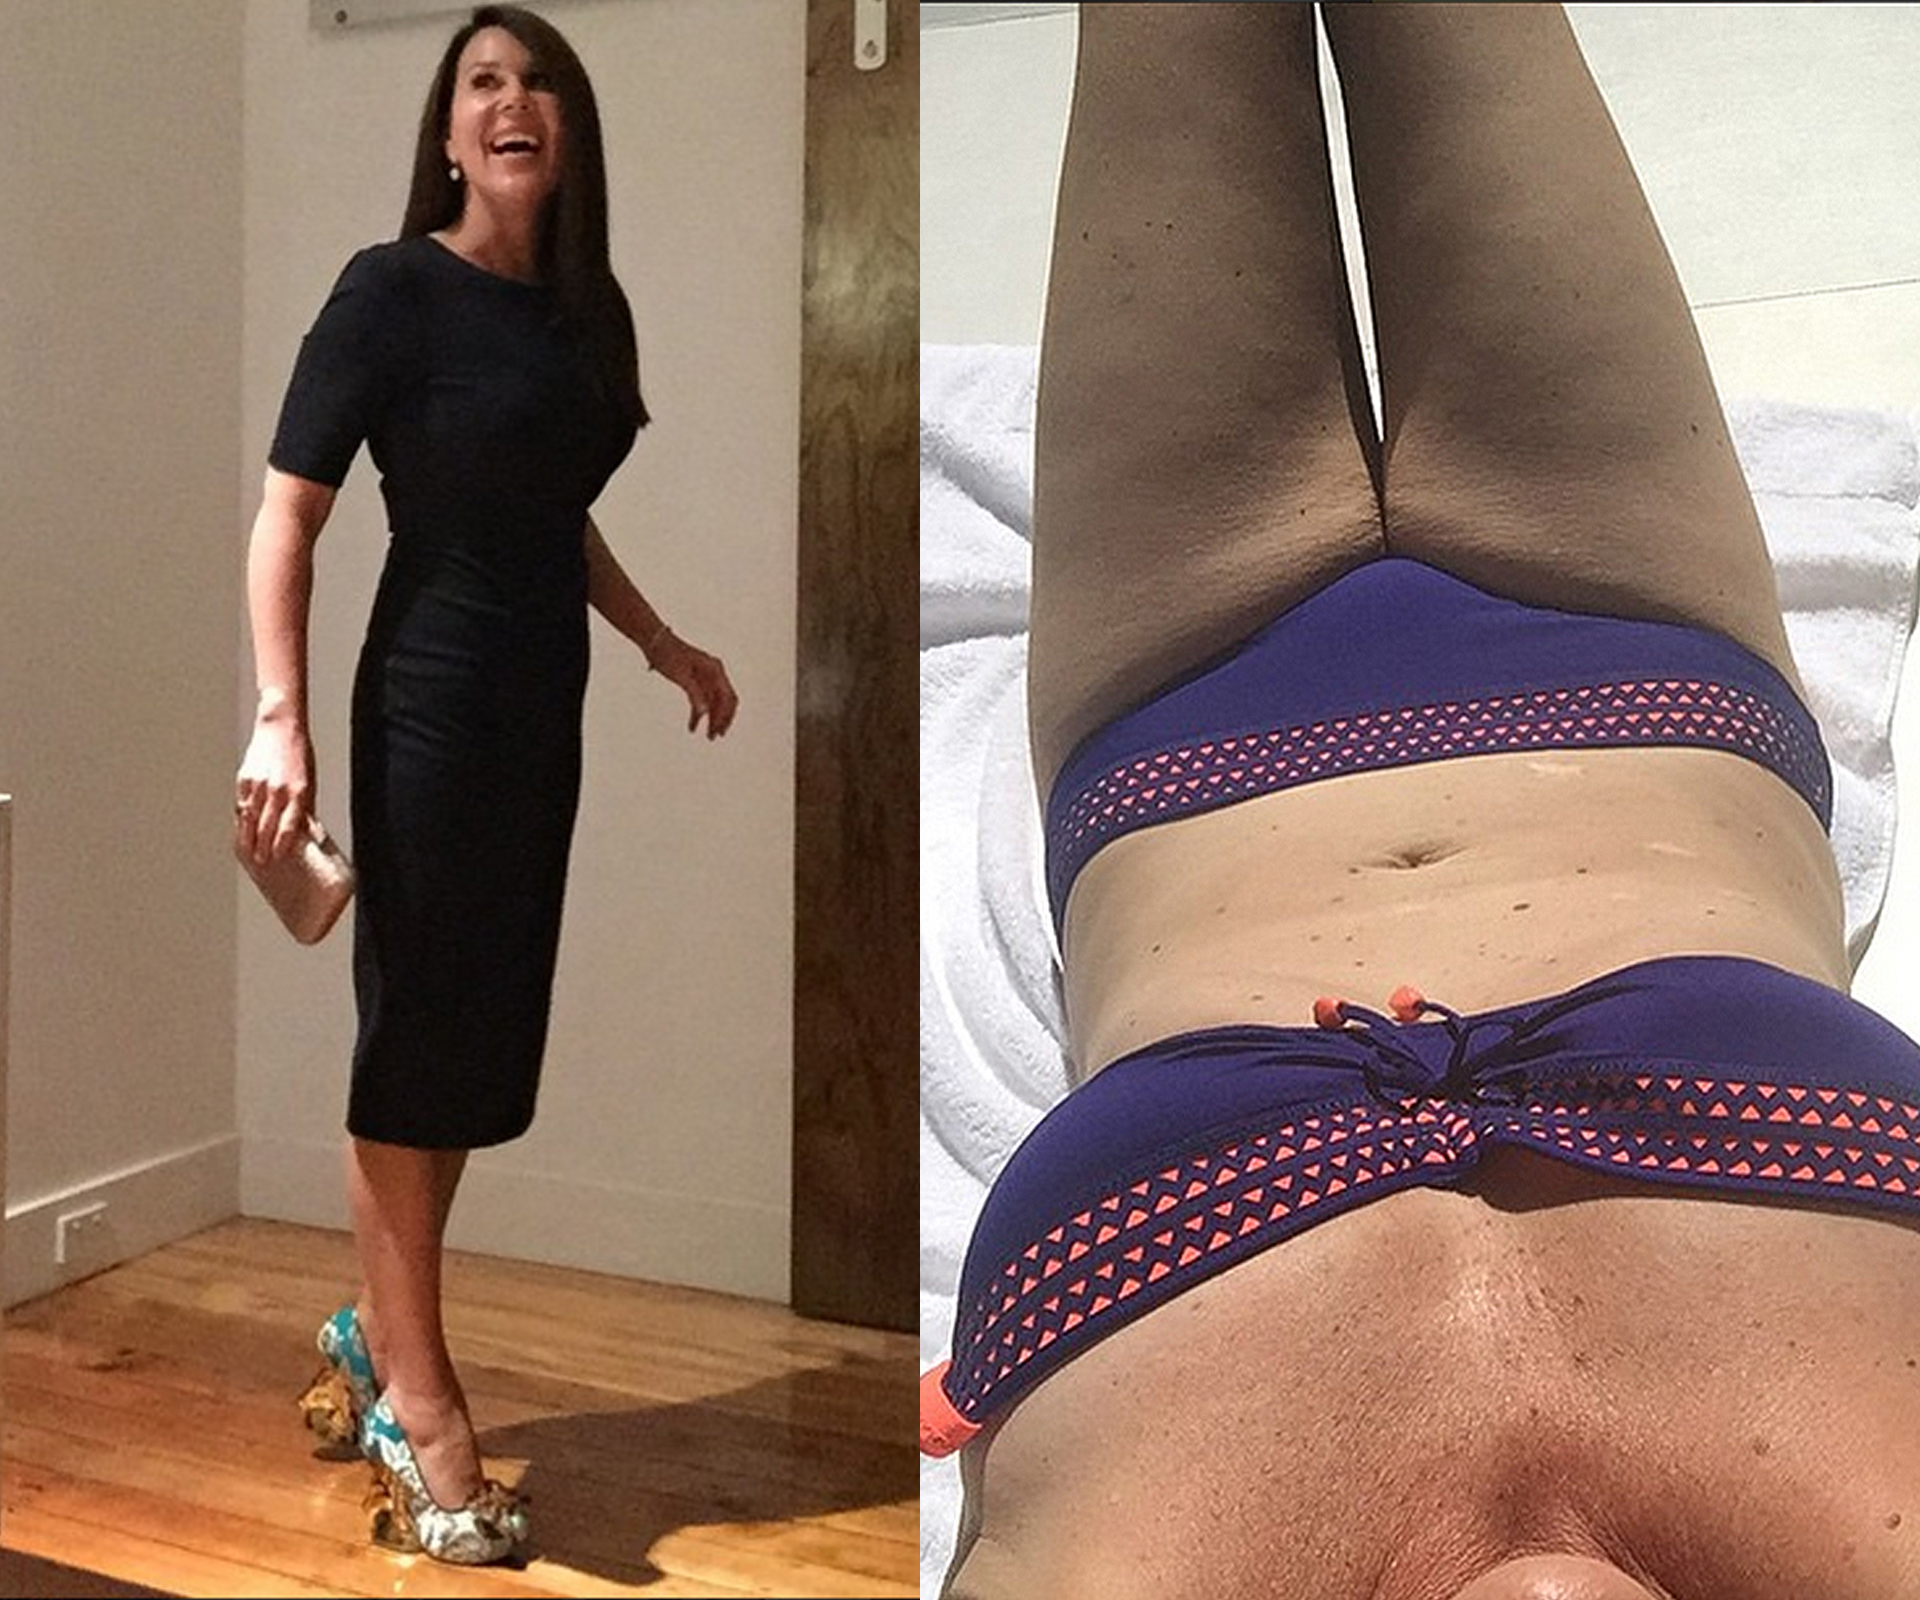 Julia Morris says weight loss is a result of hard work – not surgery